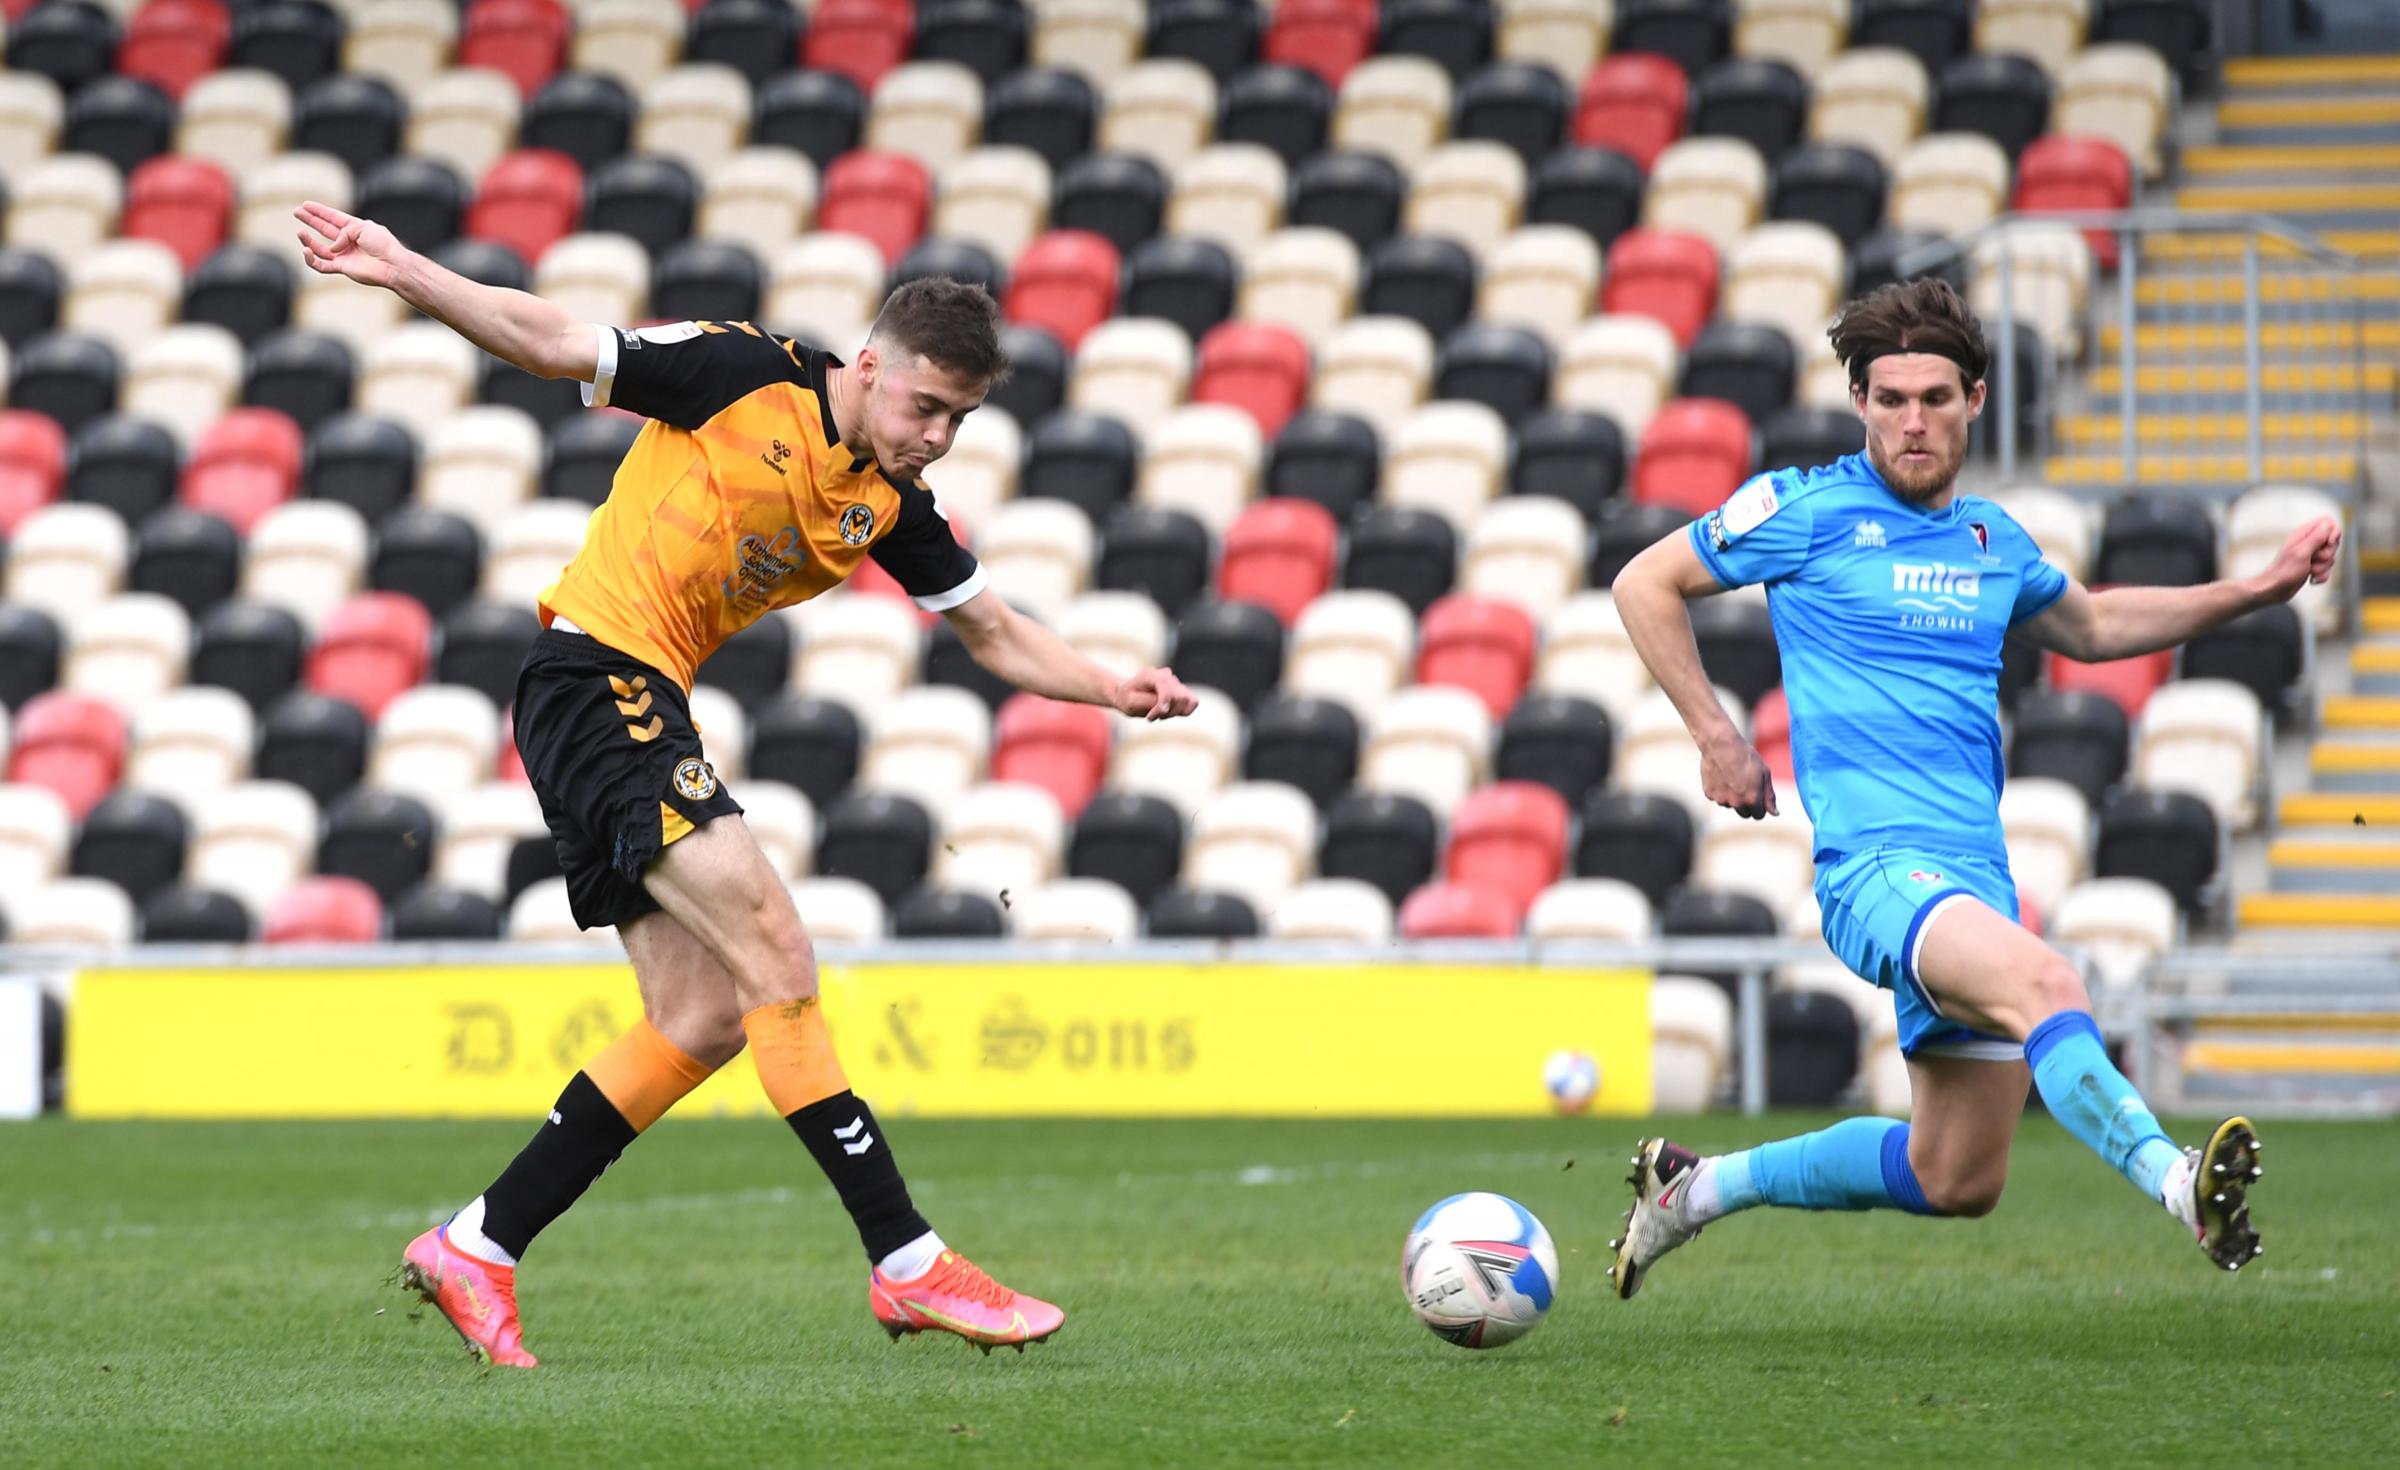 01.05.21 - Newport County v Cheltenham Town - SkyBet League 2 -.Lewis Collins of Newport County tries a shot at goal..